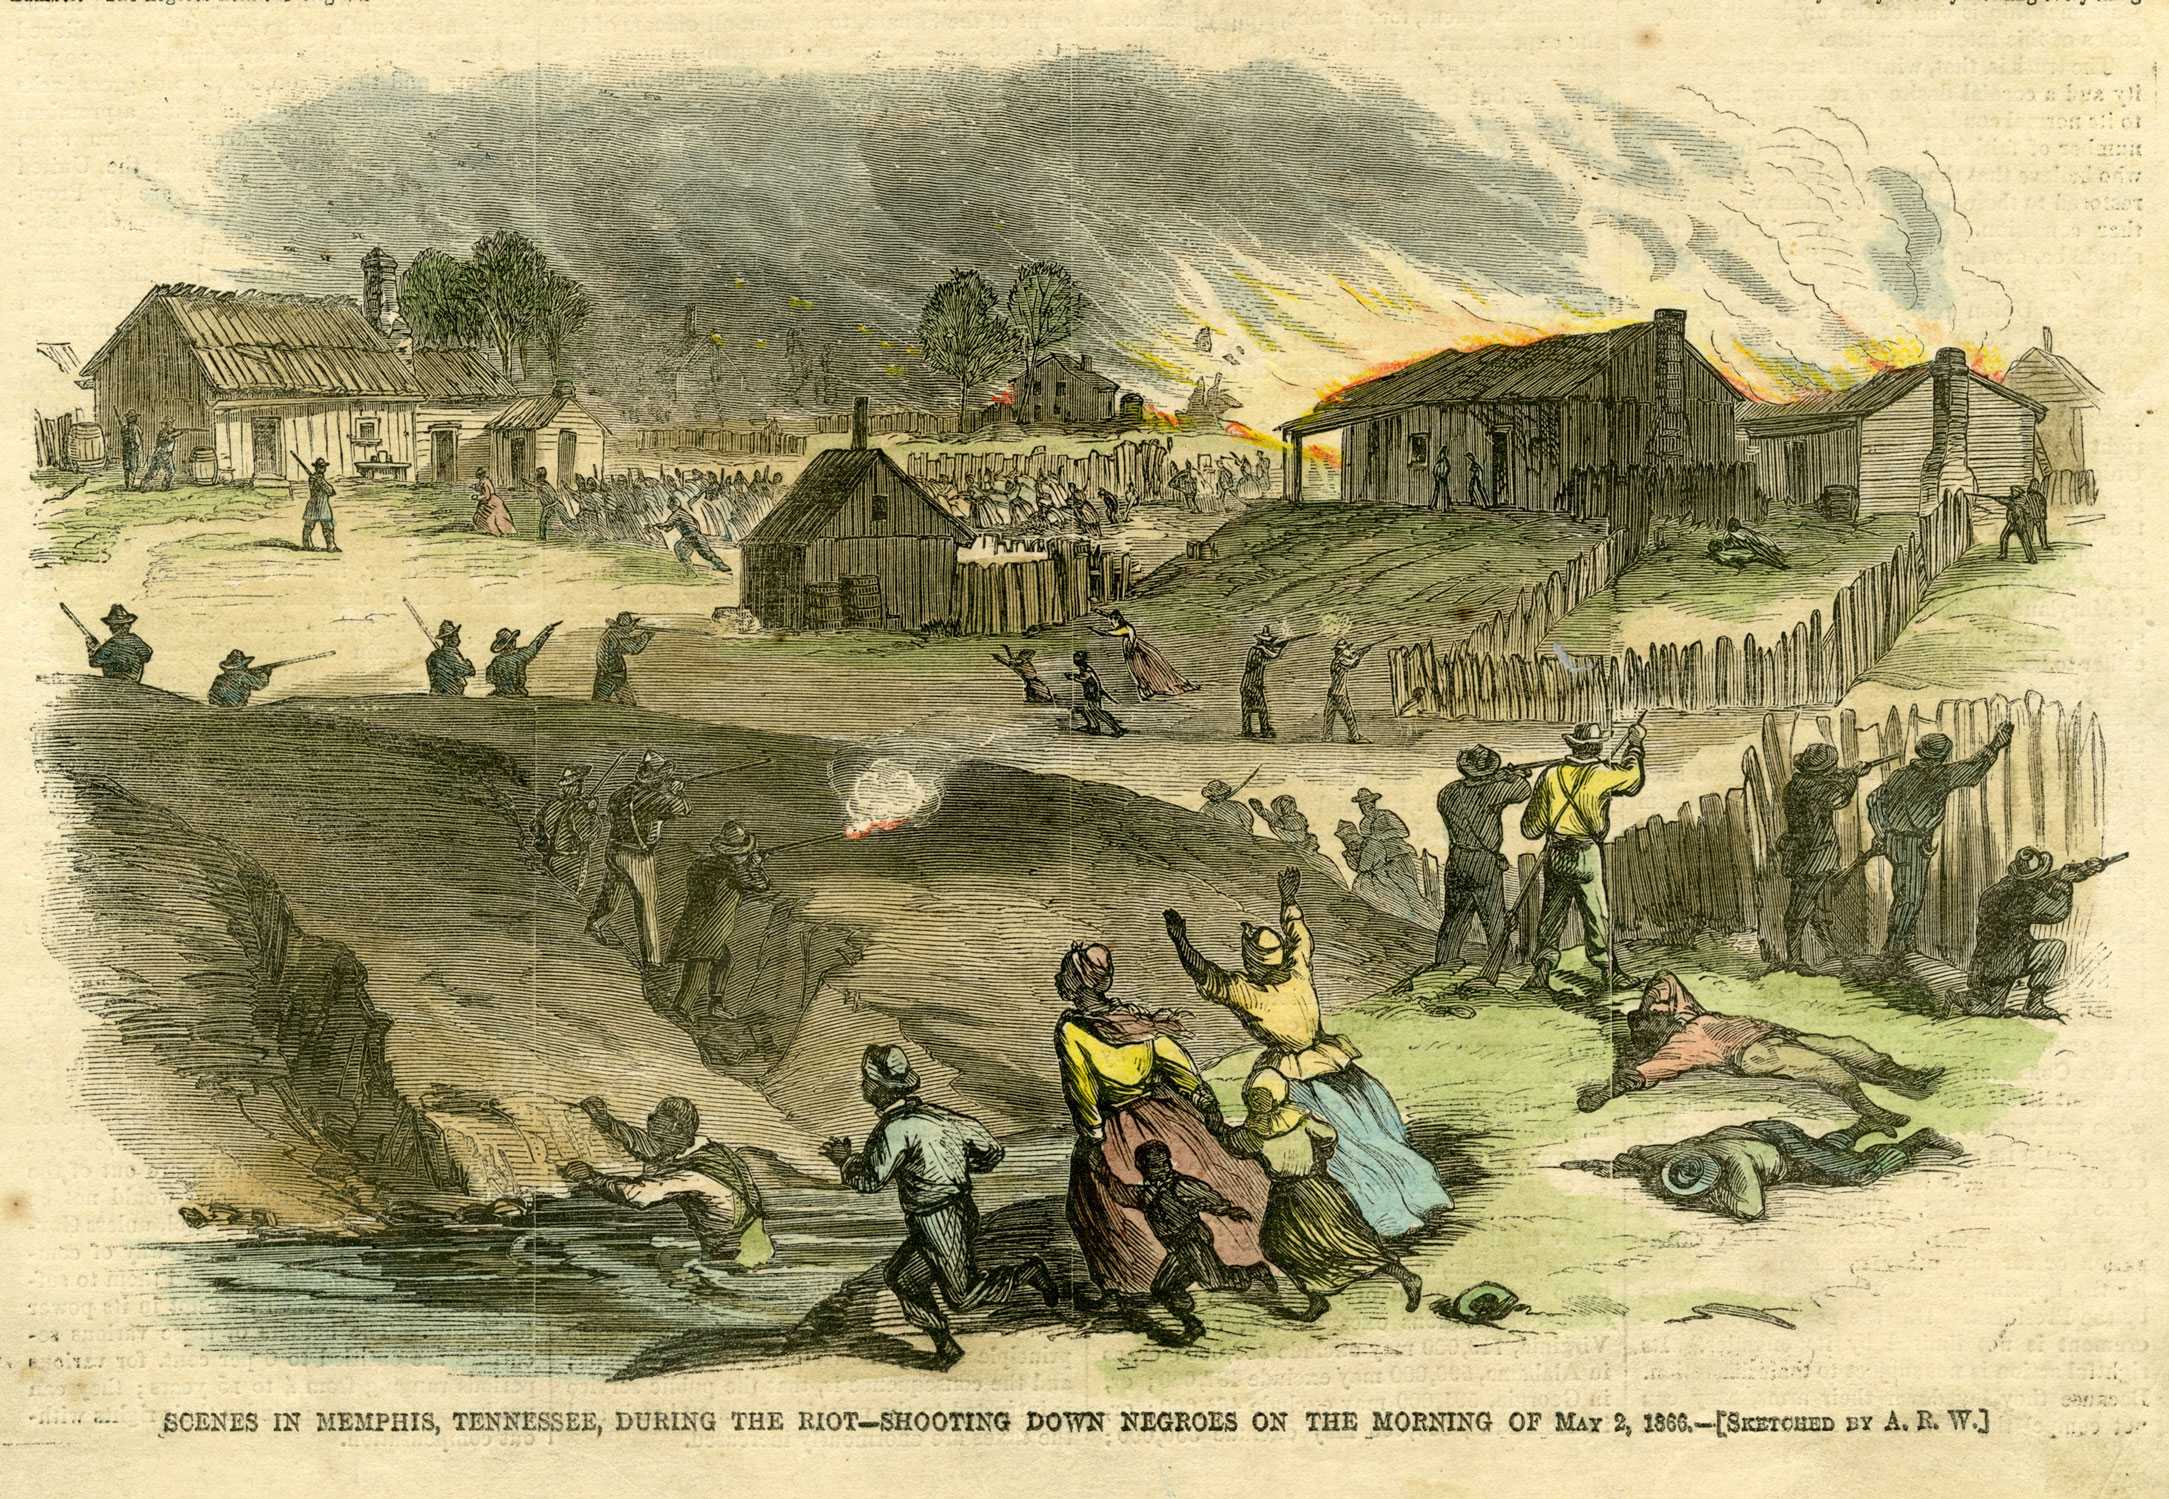 A colored print depicting white civilians killing and shooting black people as they flee their homes.